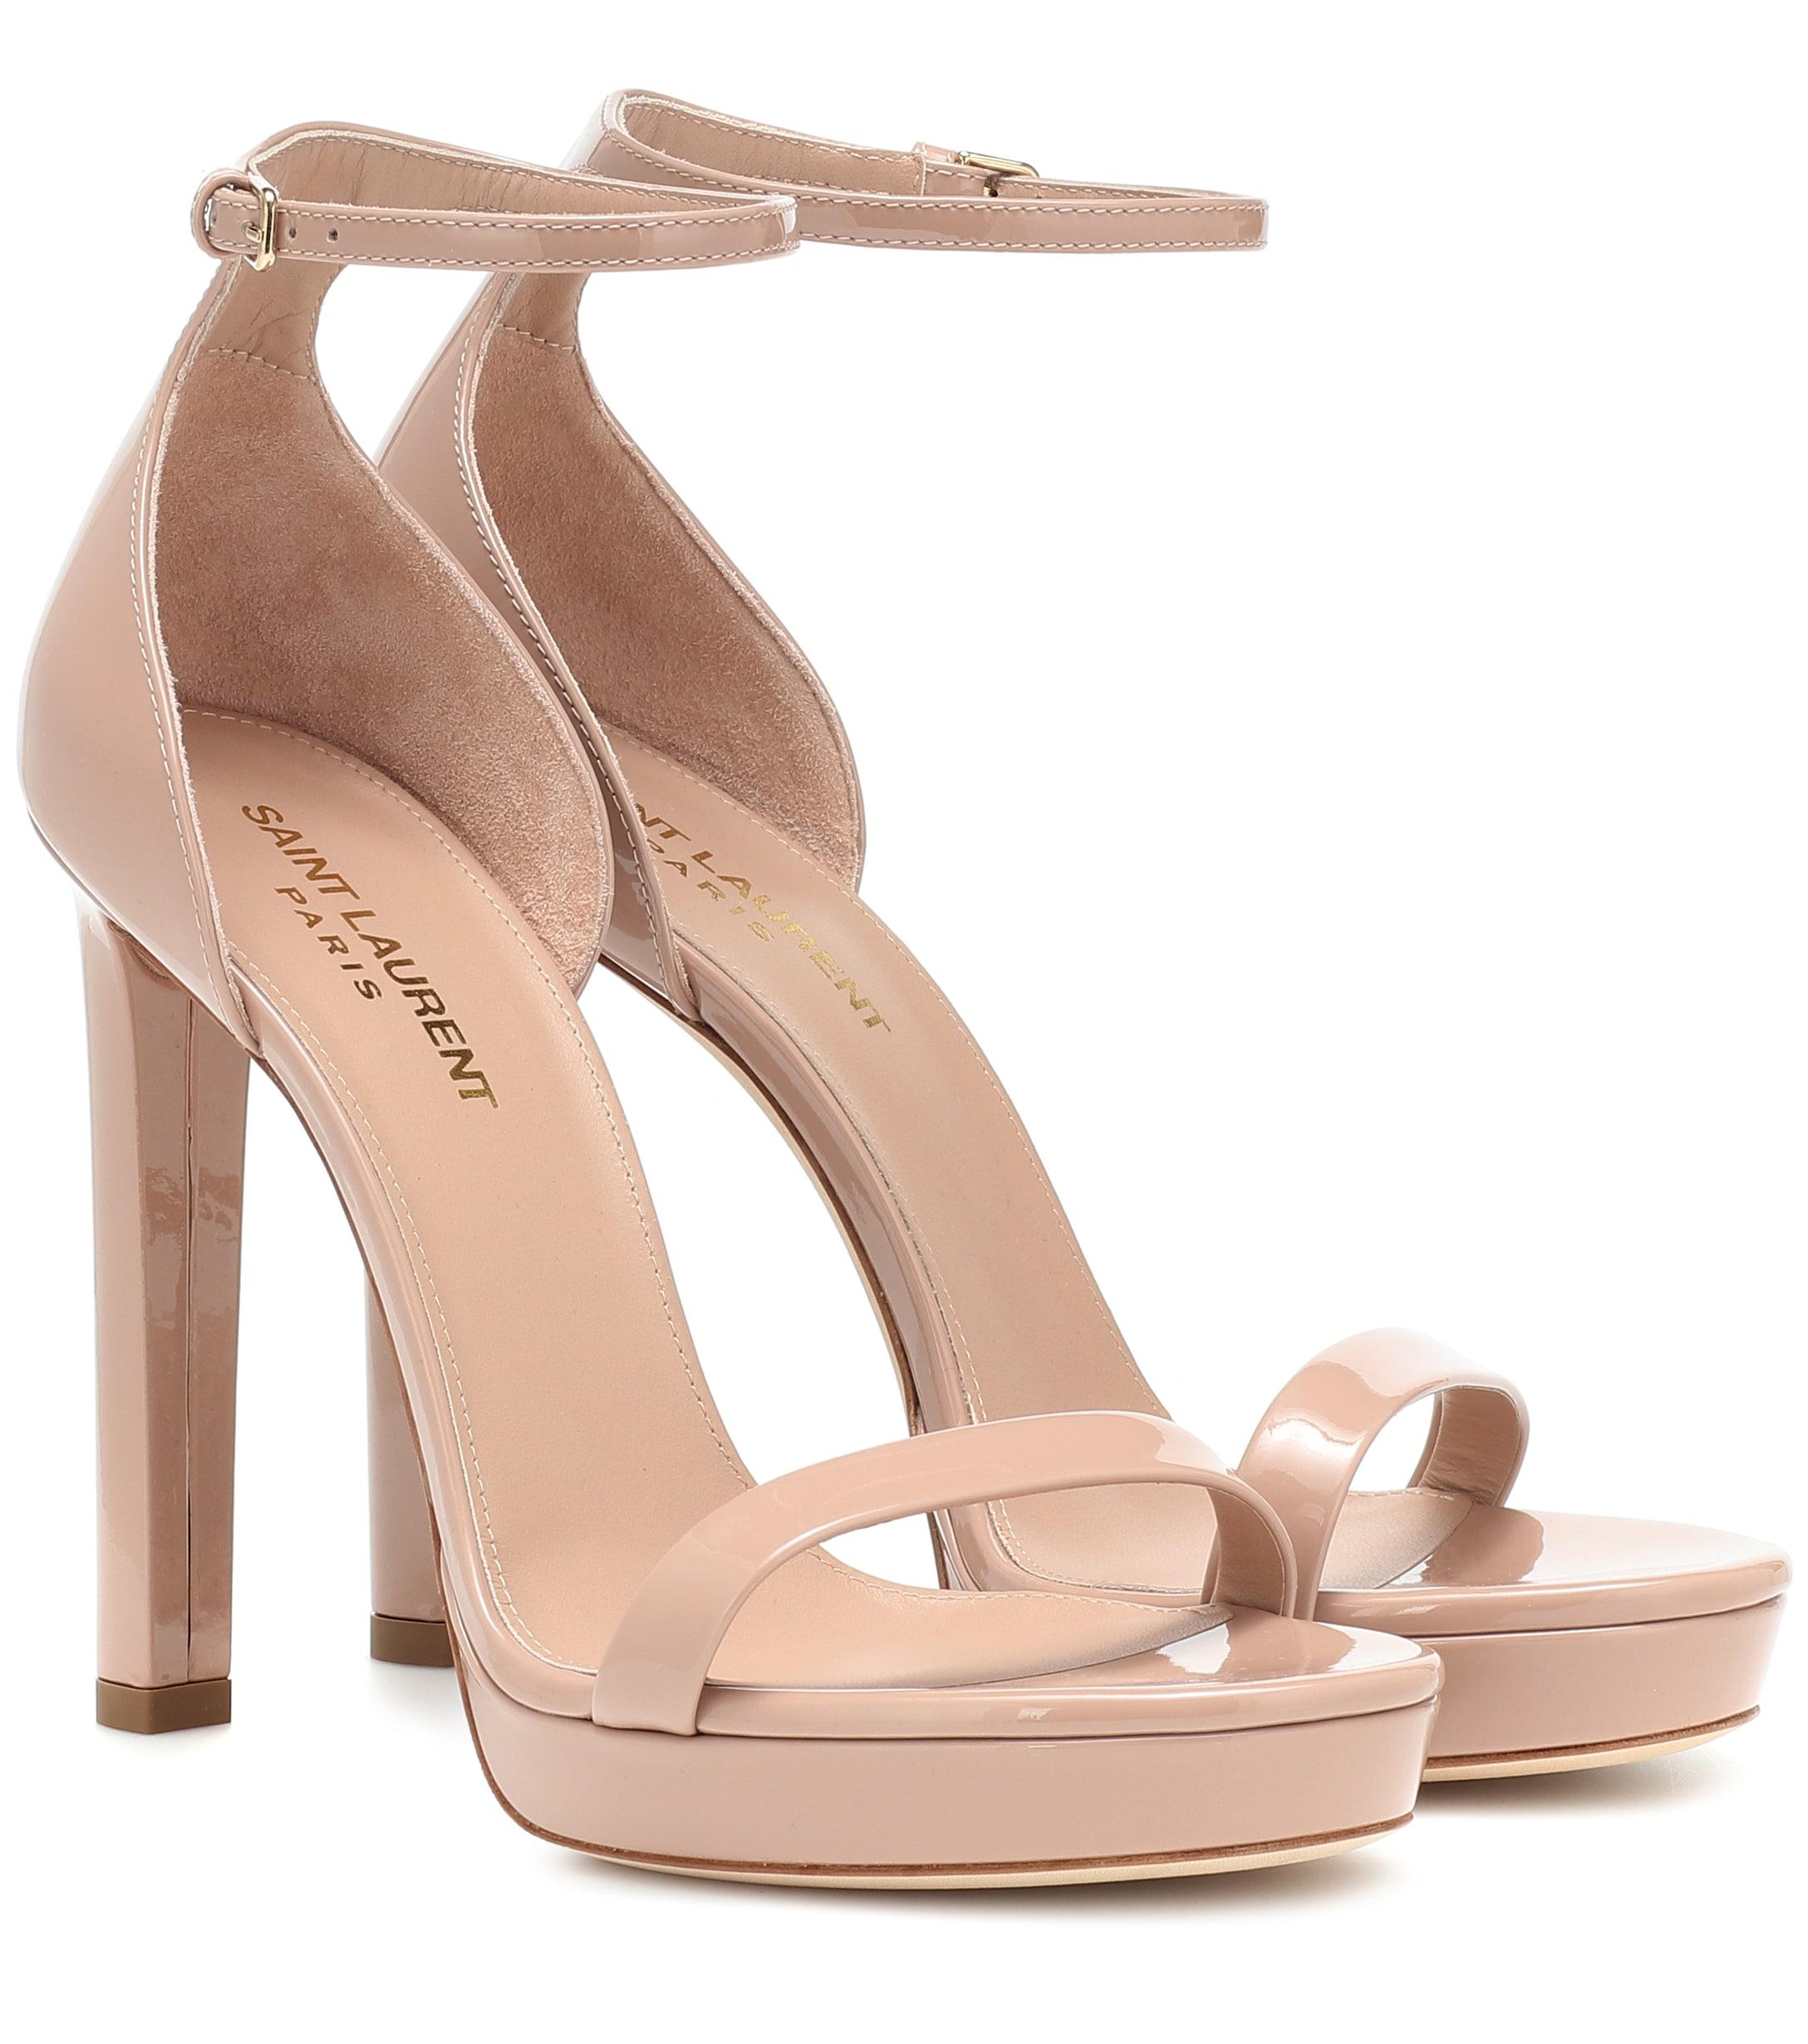 Saint Laurent Hall 105 Patent Leather Sandals in Beige (Natural) - Save ...